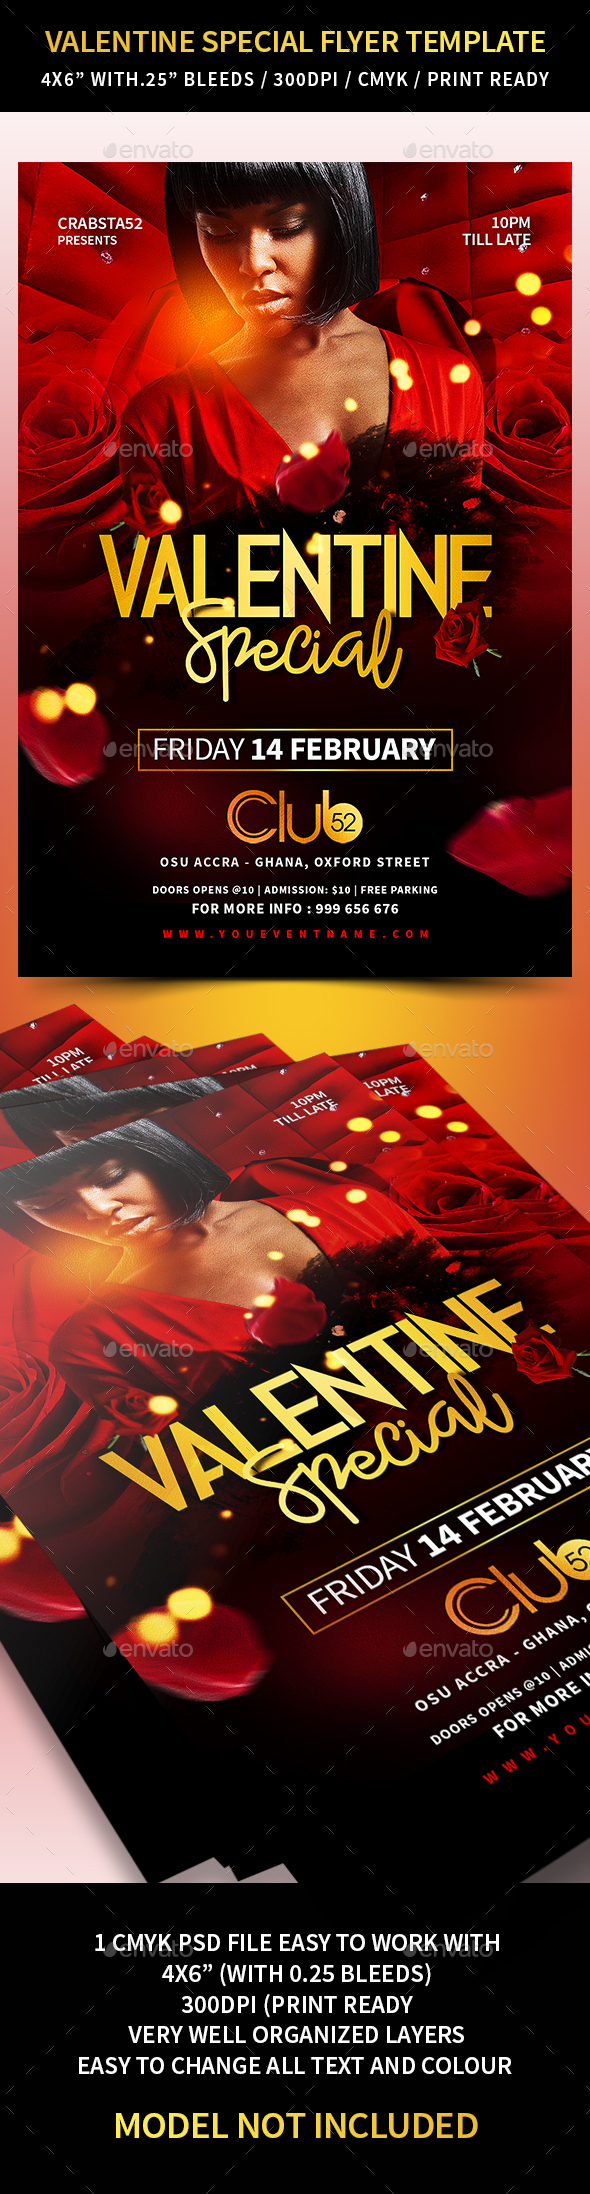 Valentine Special Flyer Template